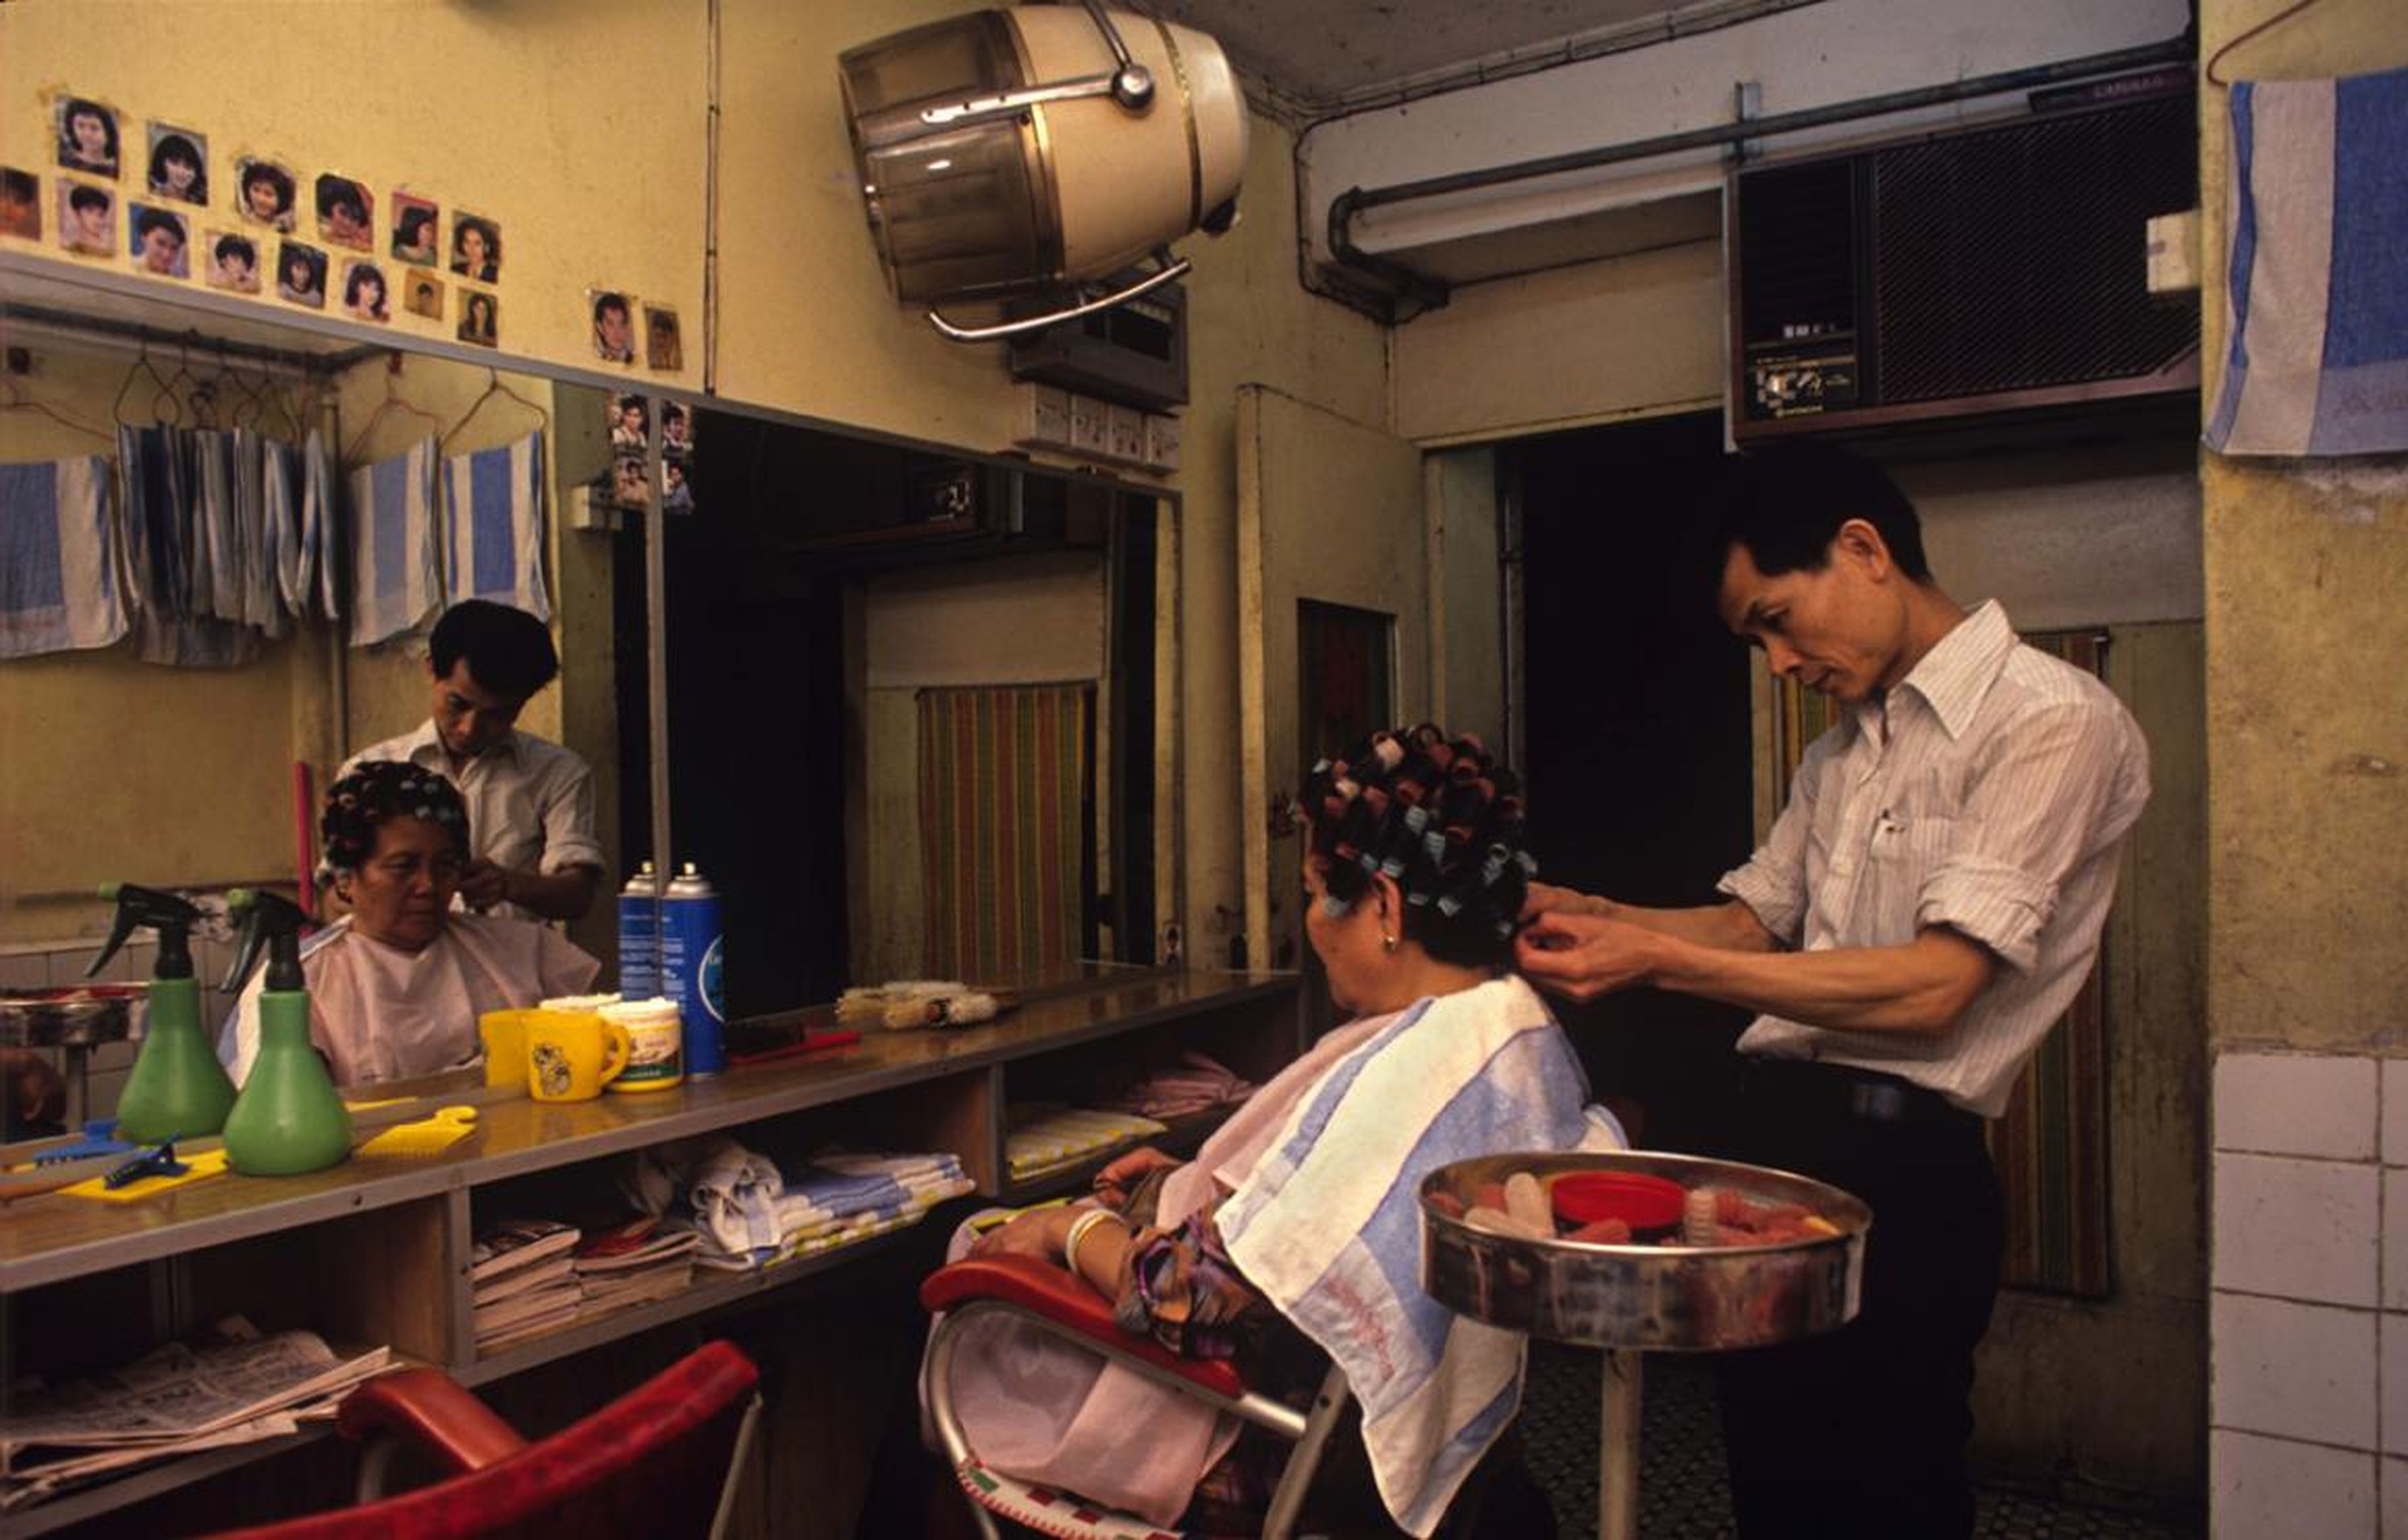 Many businesses took advantage. Ho Chi Kam ran a hairdressing salon with his wife in the city until 1991. After Ho was forced out of the Walled City, he had to go back to working for others because he could not afford the rent